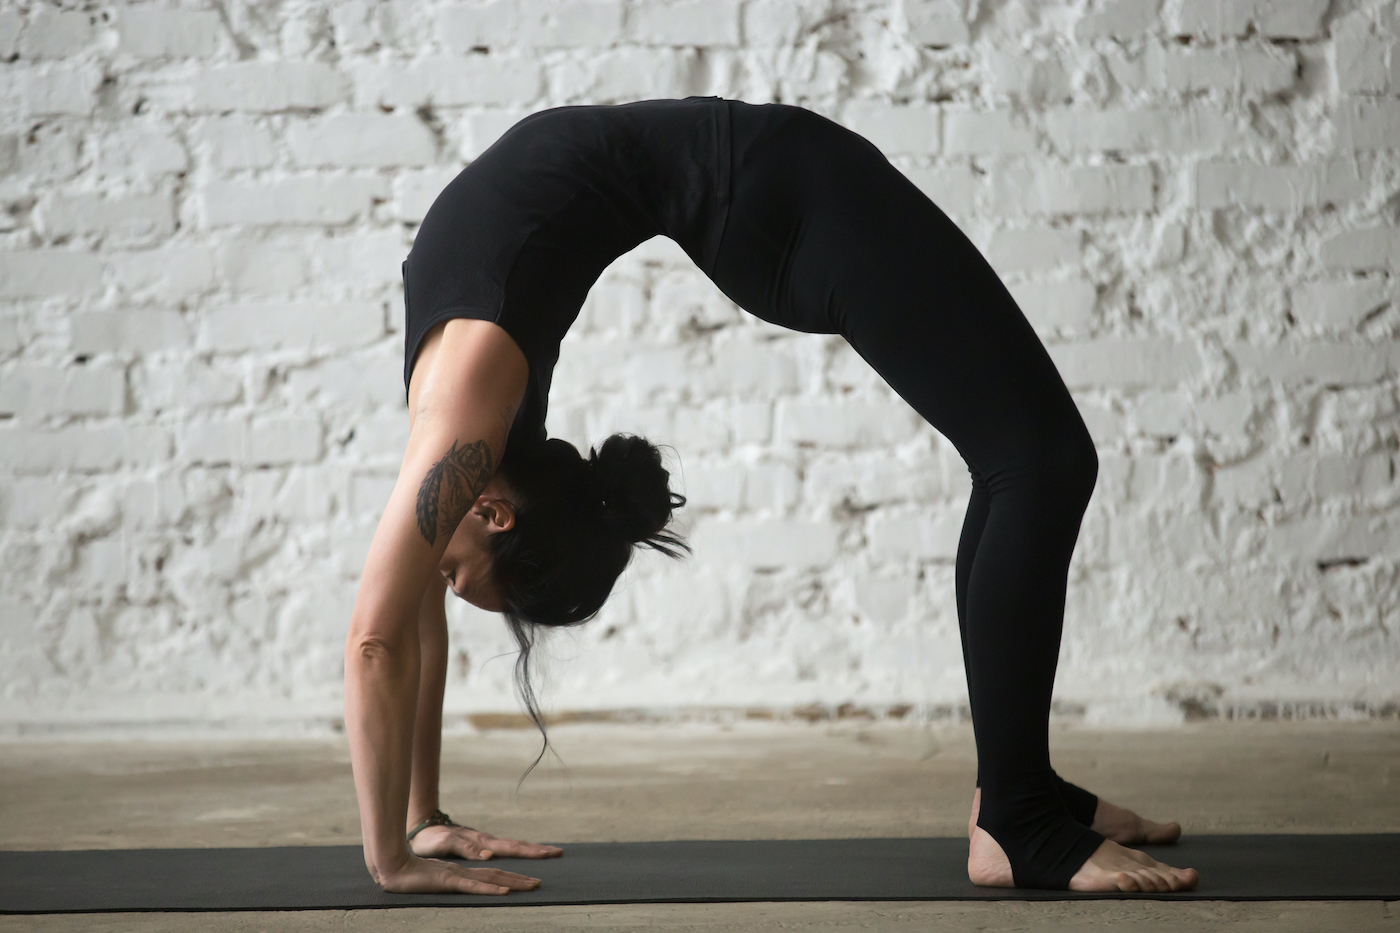 What is the best yoga for a woman? - Quora